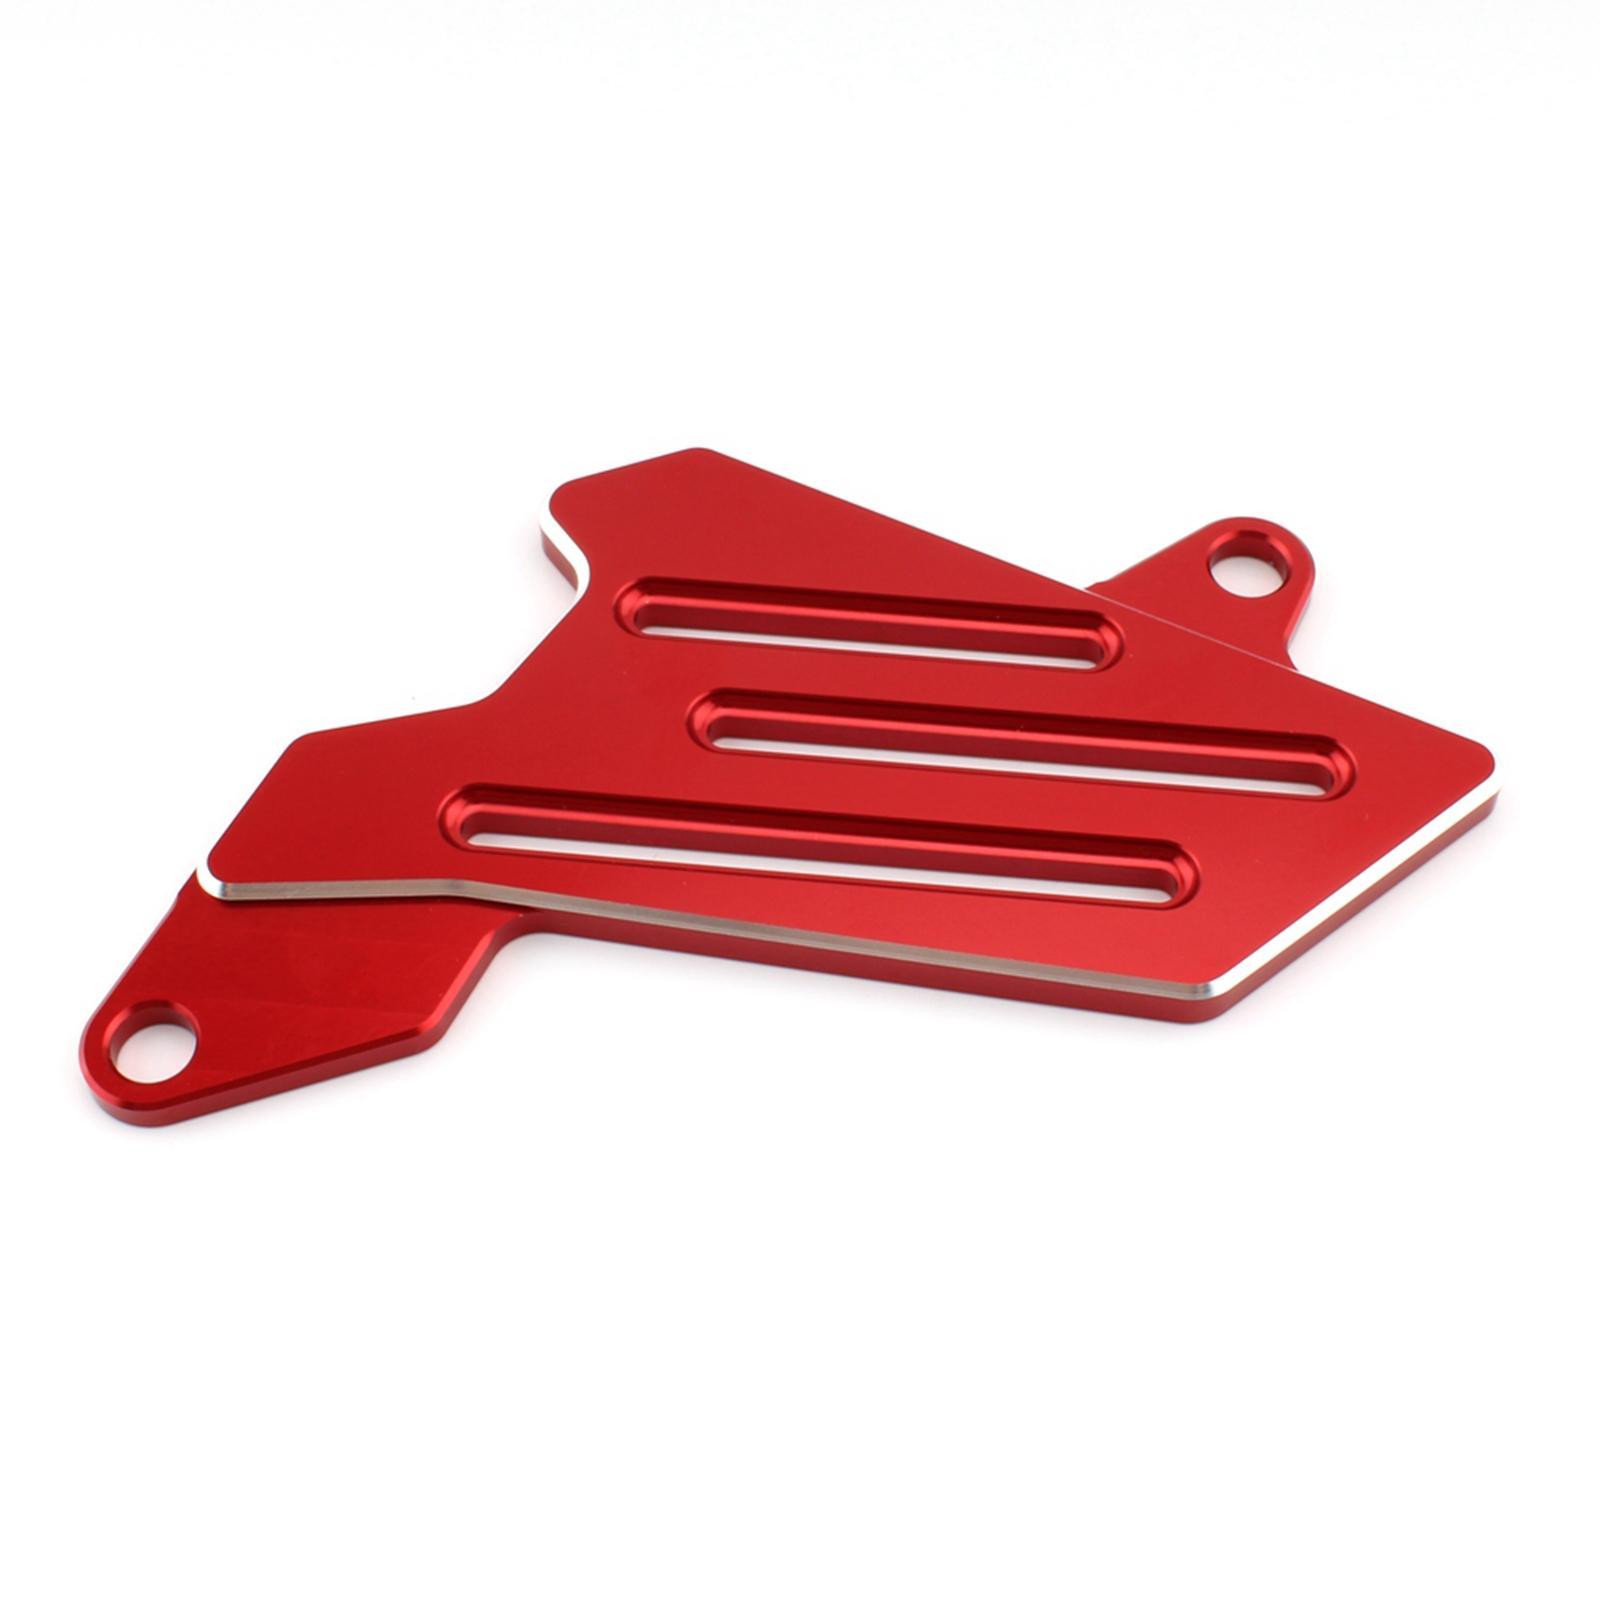 Front Sprocket Guard Red for Crf250L Crf250M 12-19 Crf250Rally 17-19